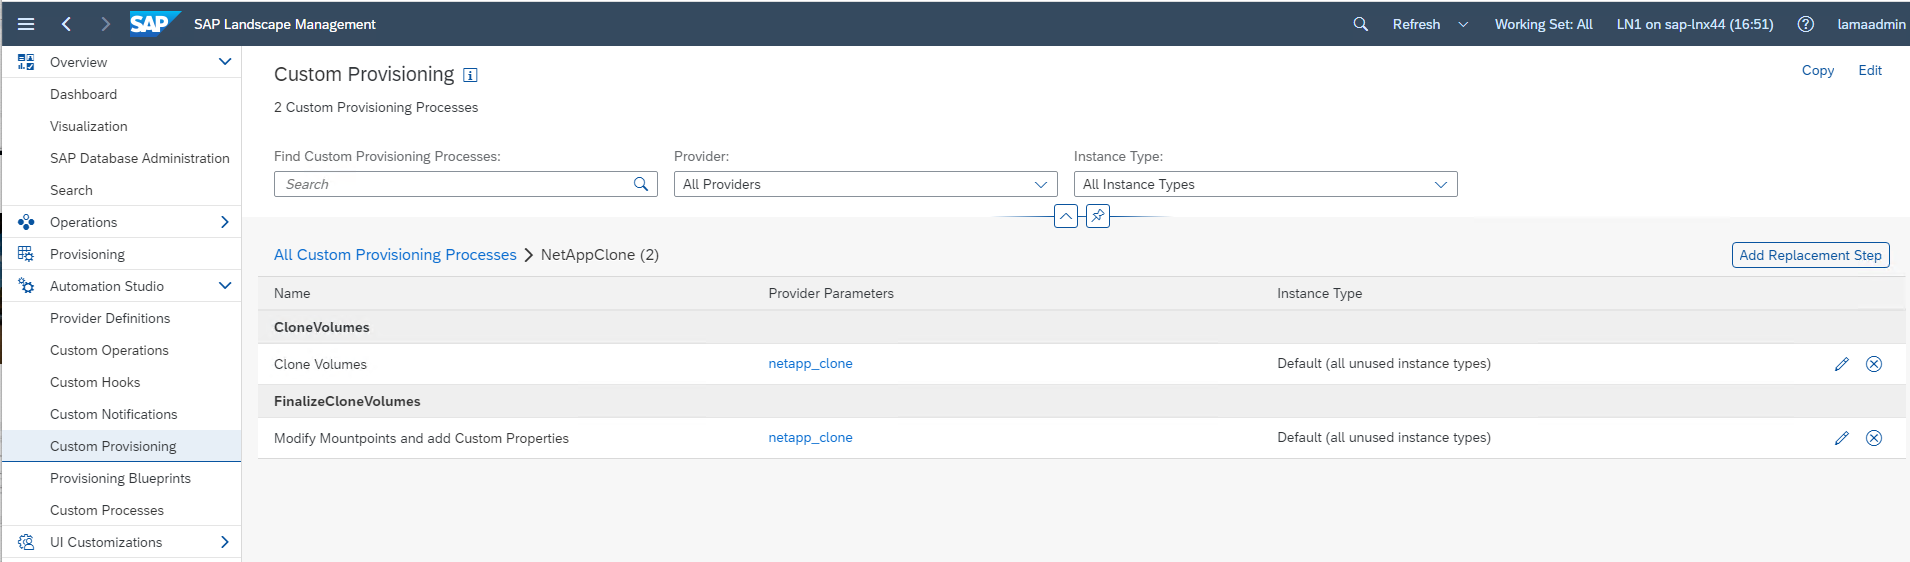 Screenshot of Custom Provisioning configuration screen. The processes CloneVolumes and FinalizeCloneVolumes are listed.